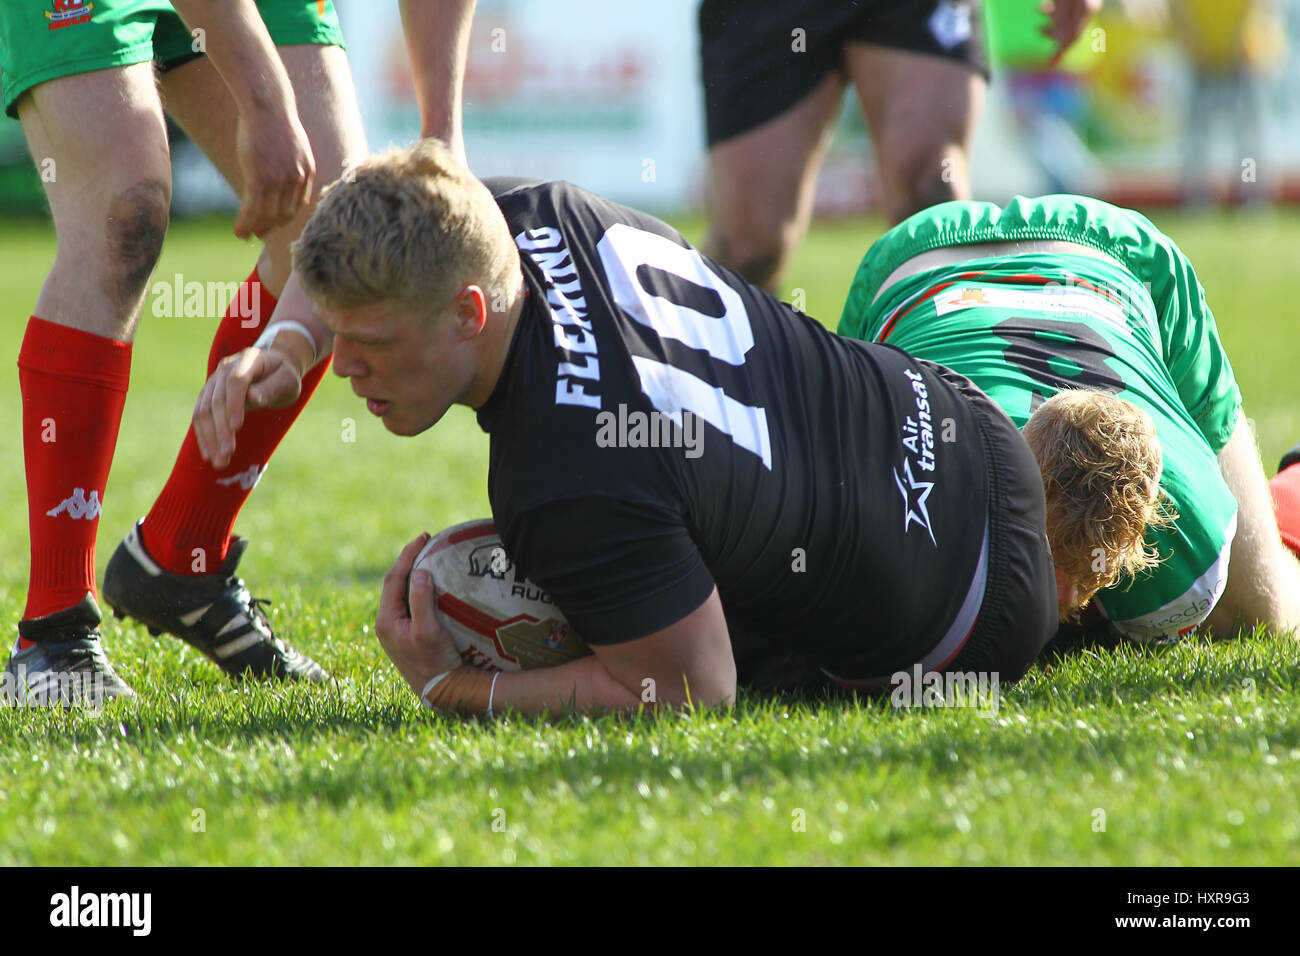 Dan Fleming of Toronto Wolfpack on the attack vs Keighley Cougars  Keighley Cougars vs Toronto Wolfpack During the Kingstone Press League One clash at Cougar Park, Keighley , West Yorkshire,  Picture by Stephen Gaunt/Touchlinepics.com/Alamy Live News Stock Photo